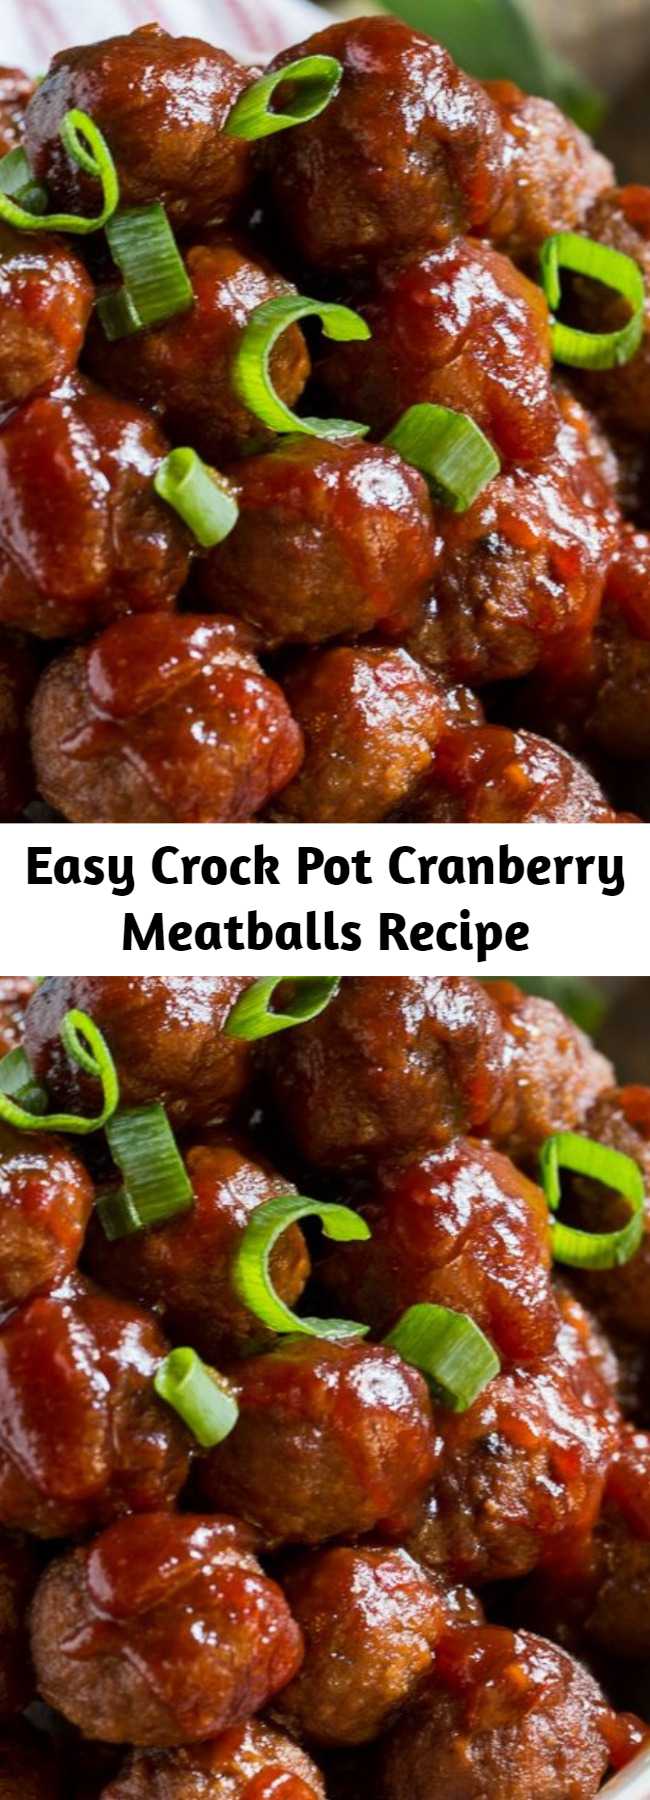 Easy Crock Pot Cranberry Meatballs Recipe - These Crock Pot Cranberry Meatballs take only a few minutes of prep and have a delicious sweet and tangy taste with a little bit of spice.